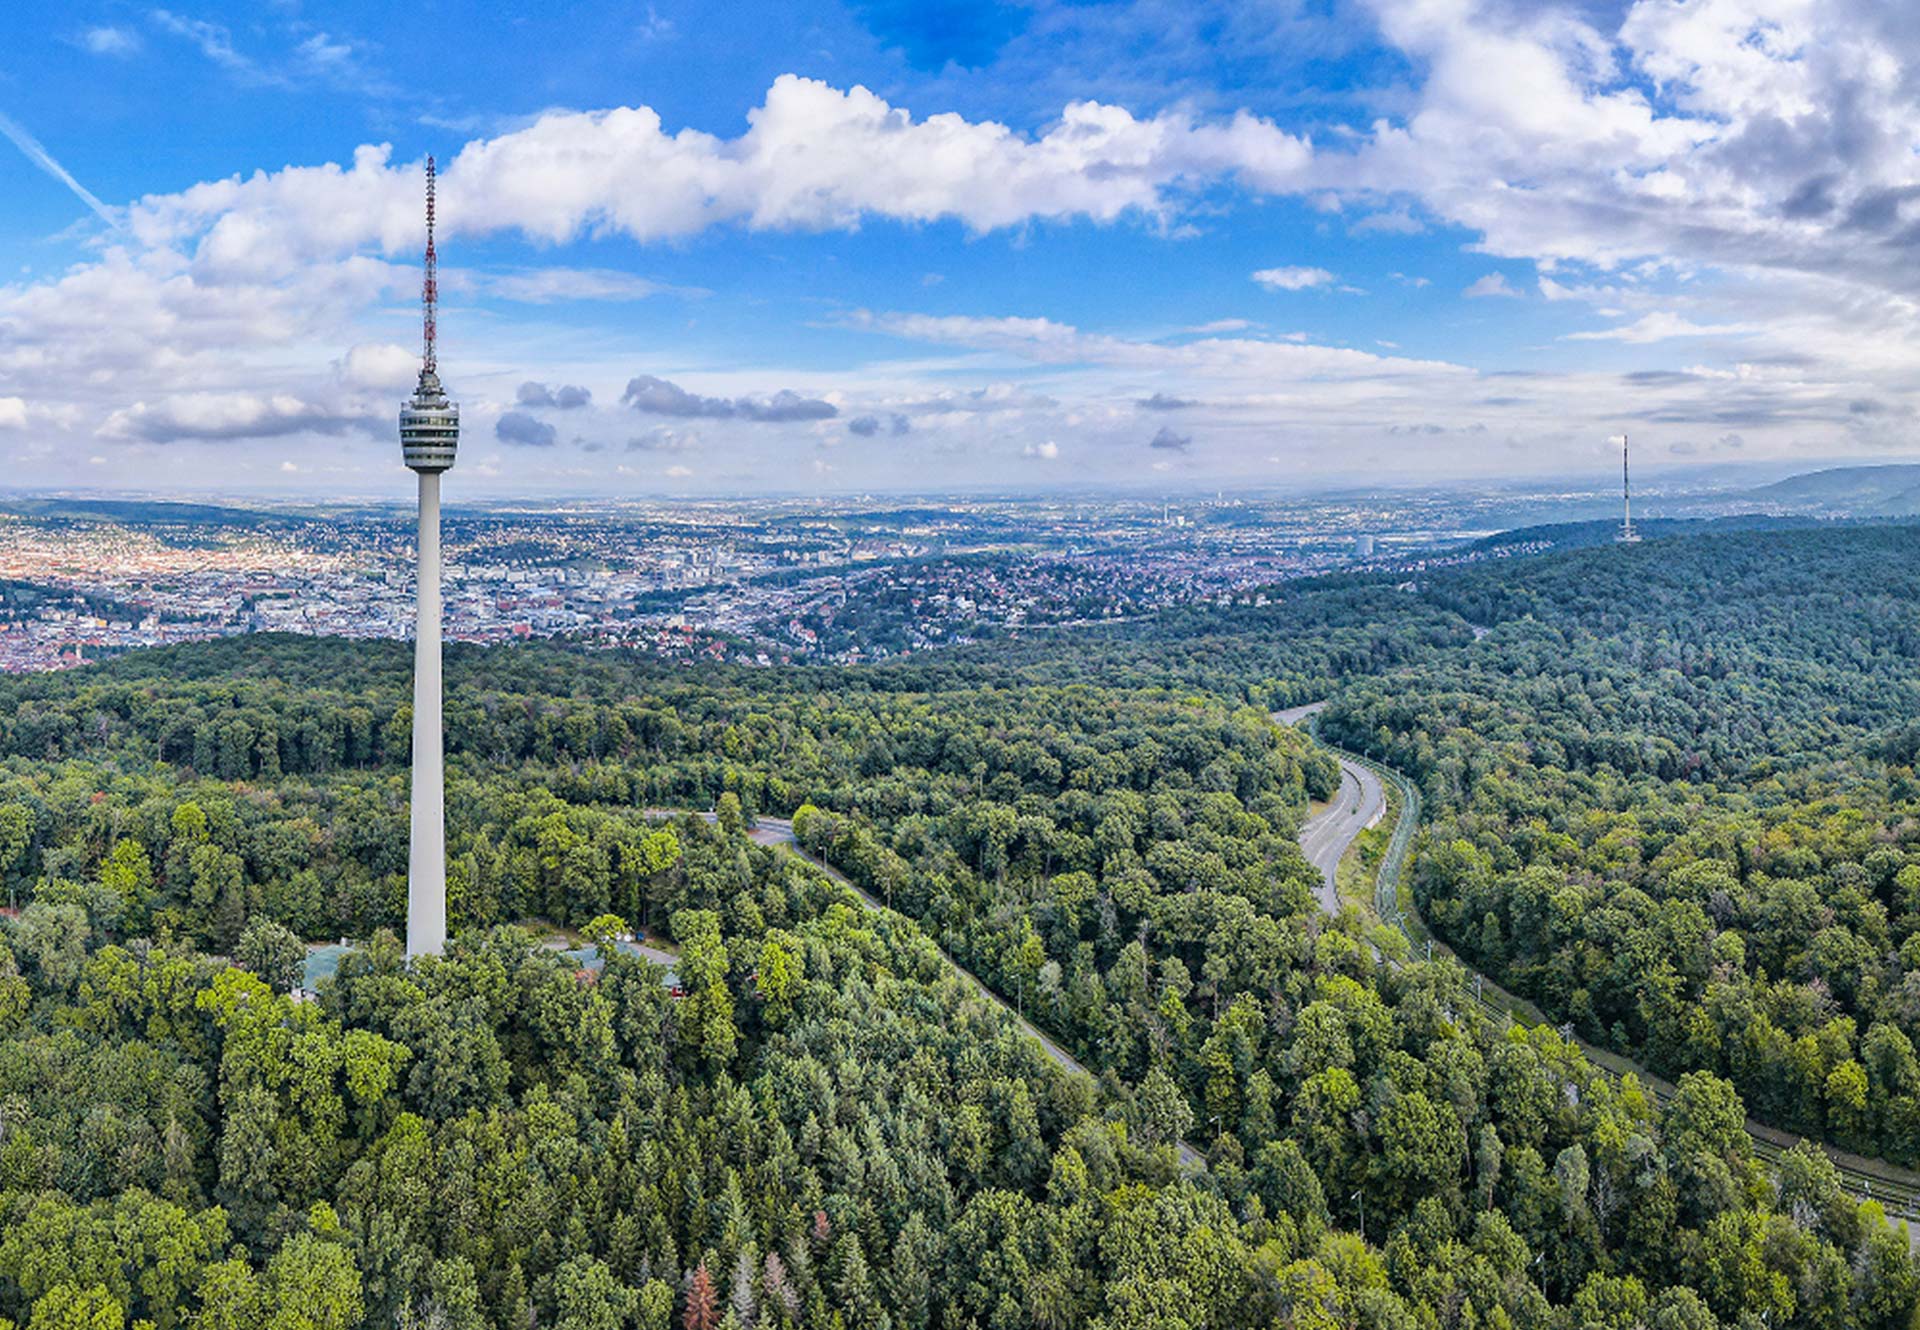 View of the Stuttgart Fernsehturm, which is surrounded by forest and nature.